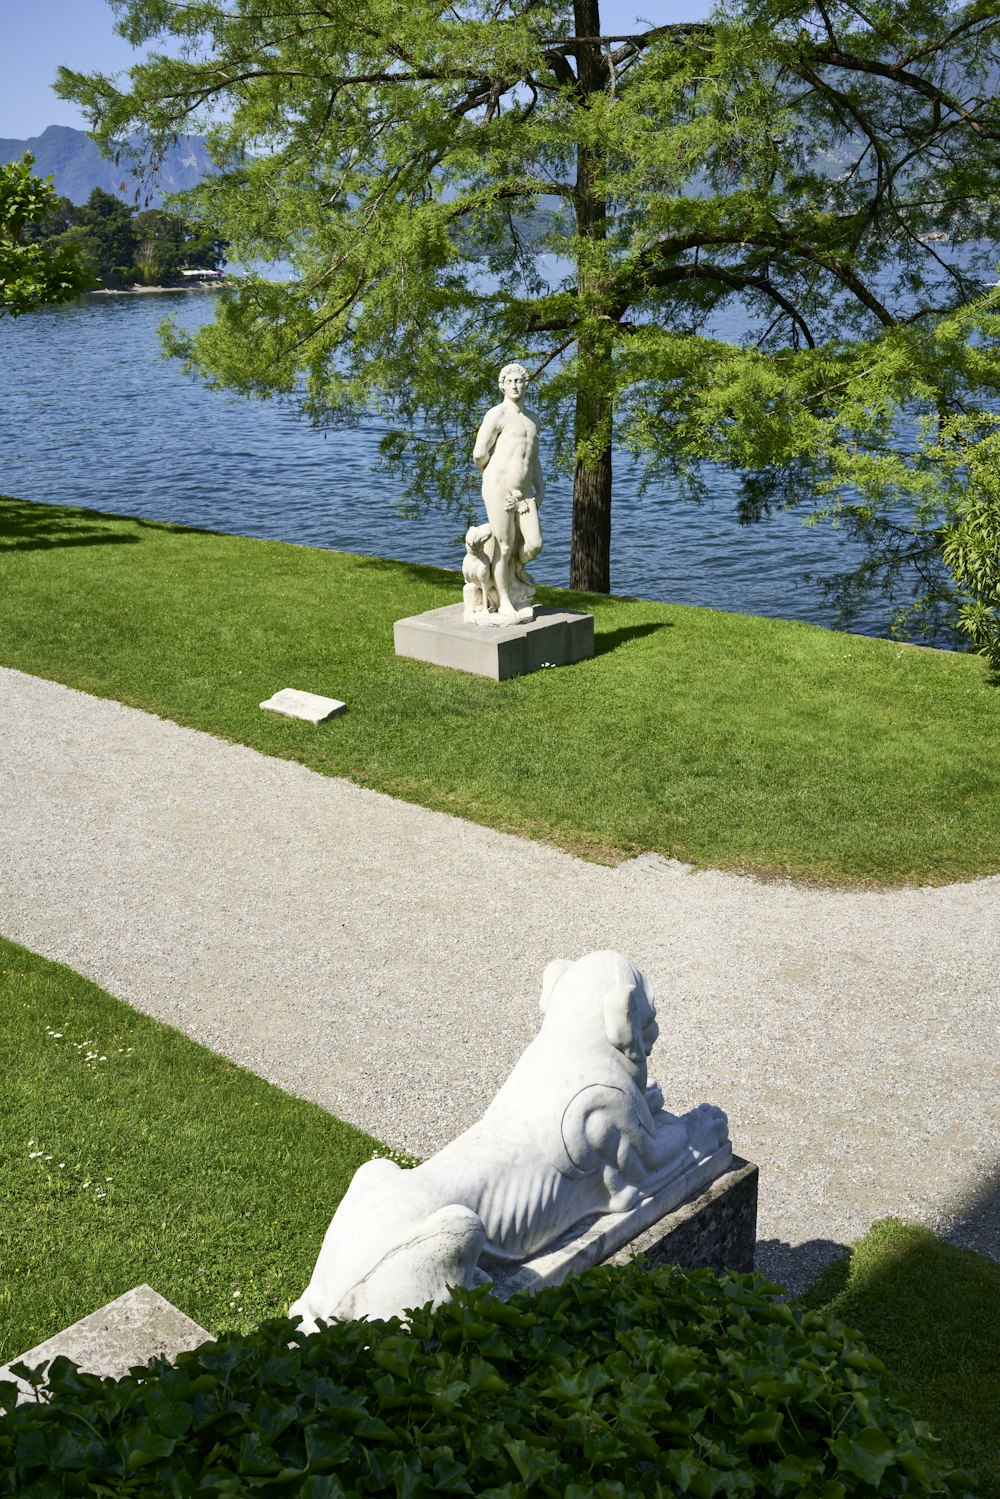 a statue of a woman sitting on a bench next to a body of water